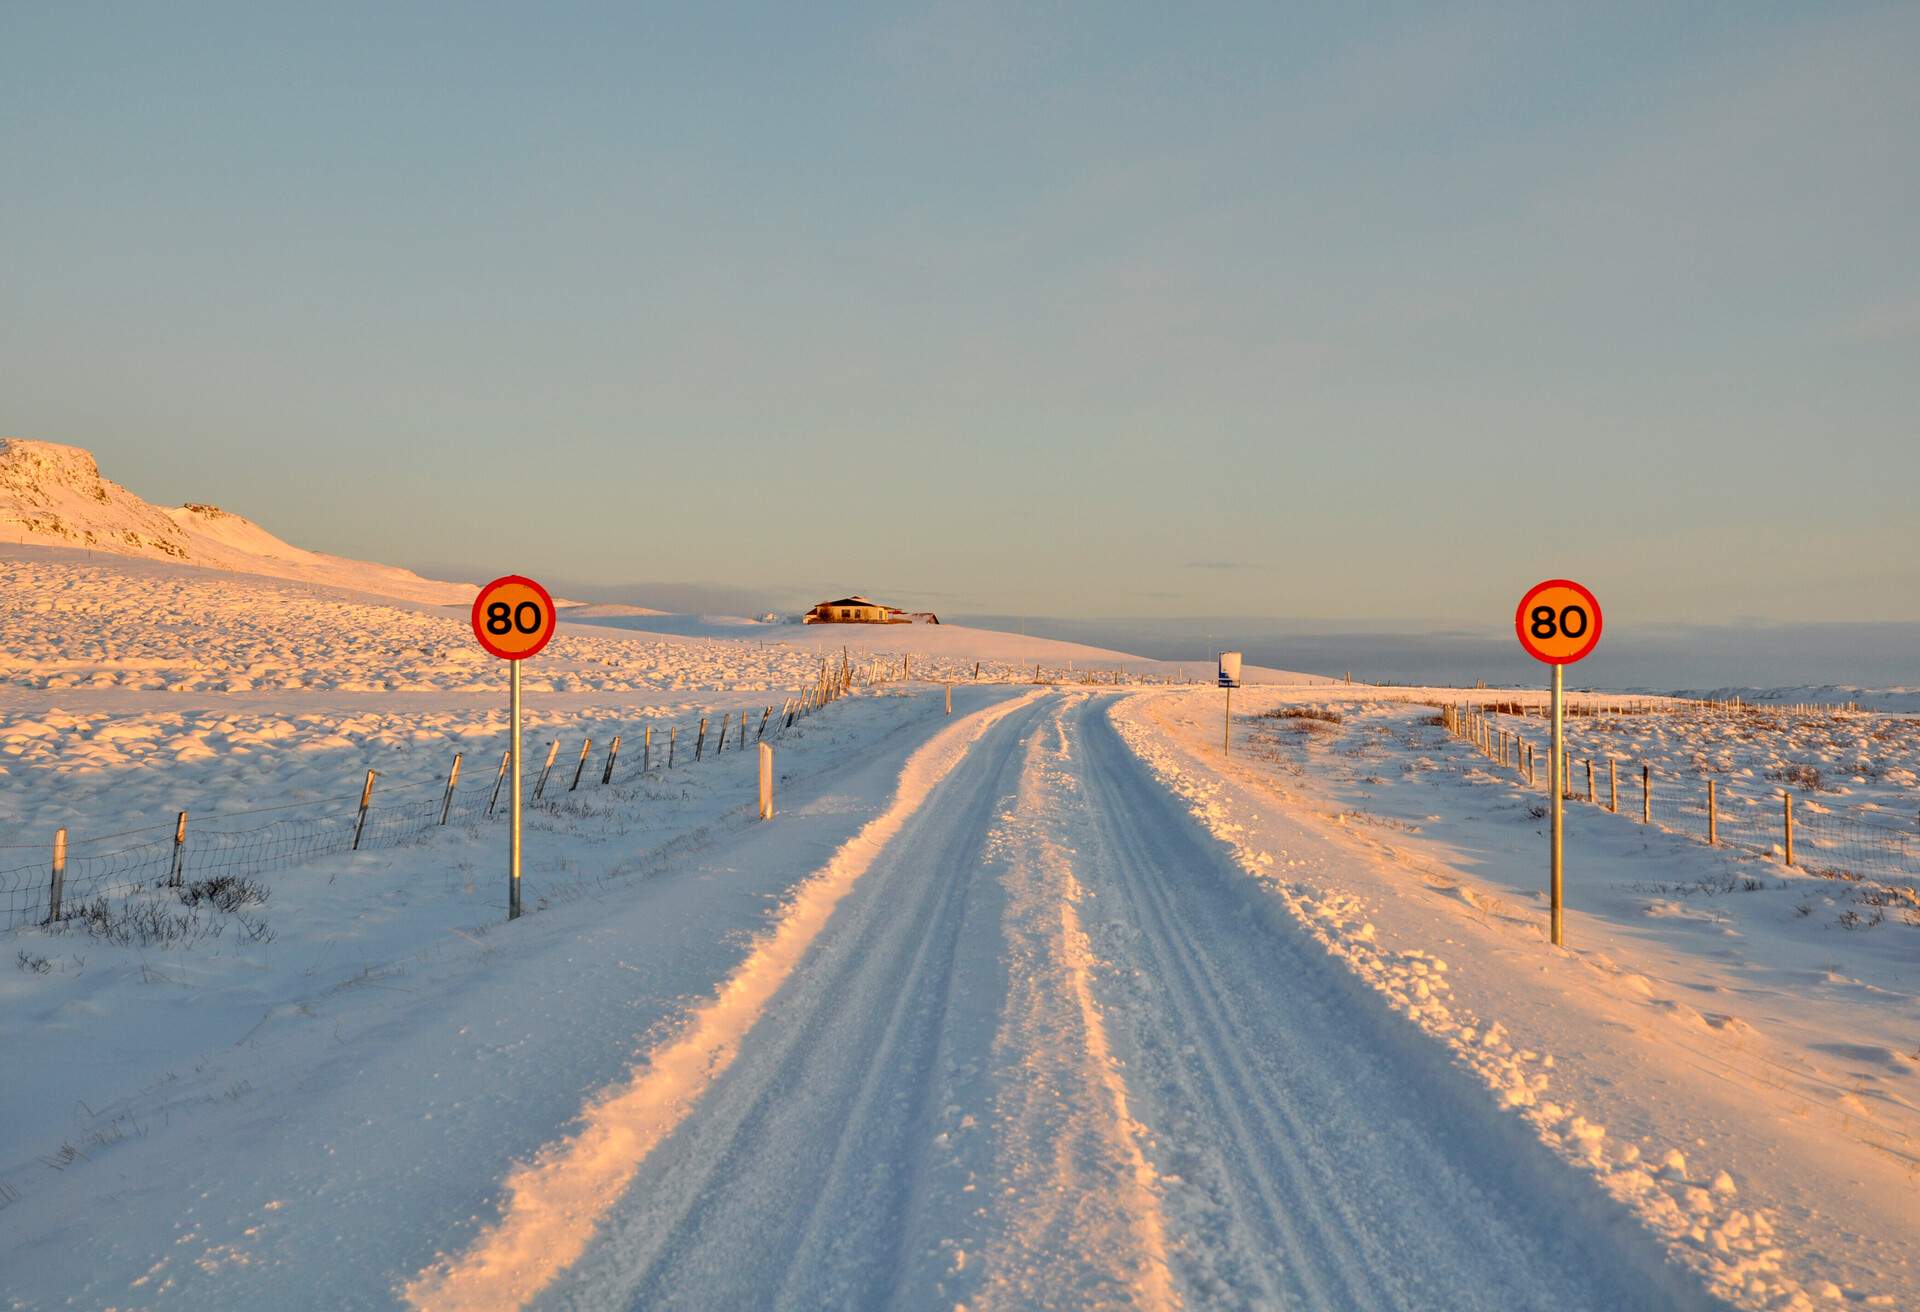 Snowy covered road and Road sign near Stykkisholmur west Iceland. Stykkisholmur is a town and municipality situated in the western part of Iceland, in the northern part of the Snæfellsnes peninsula.